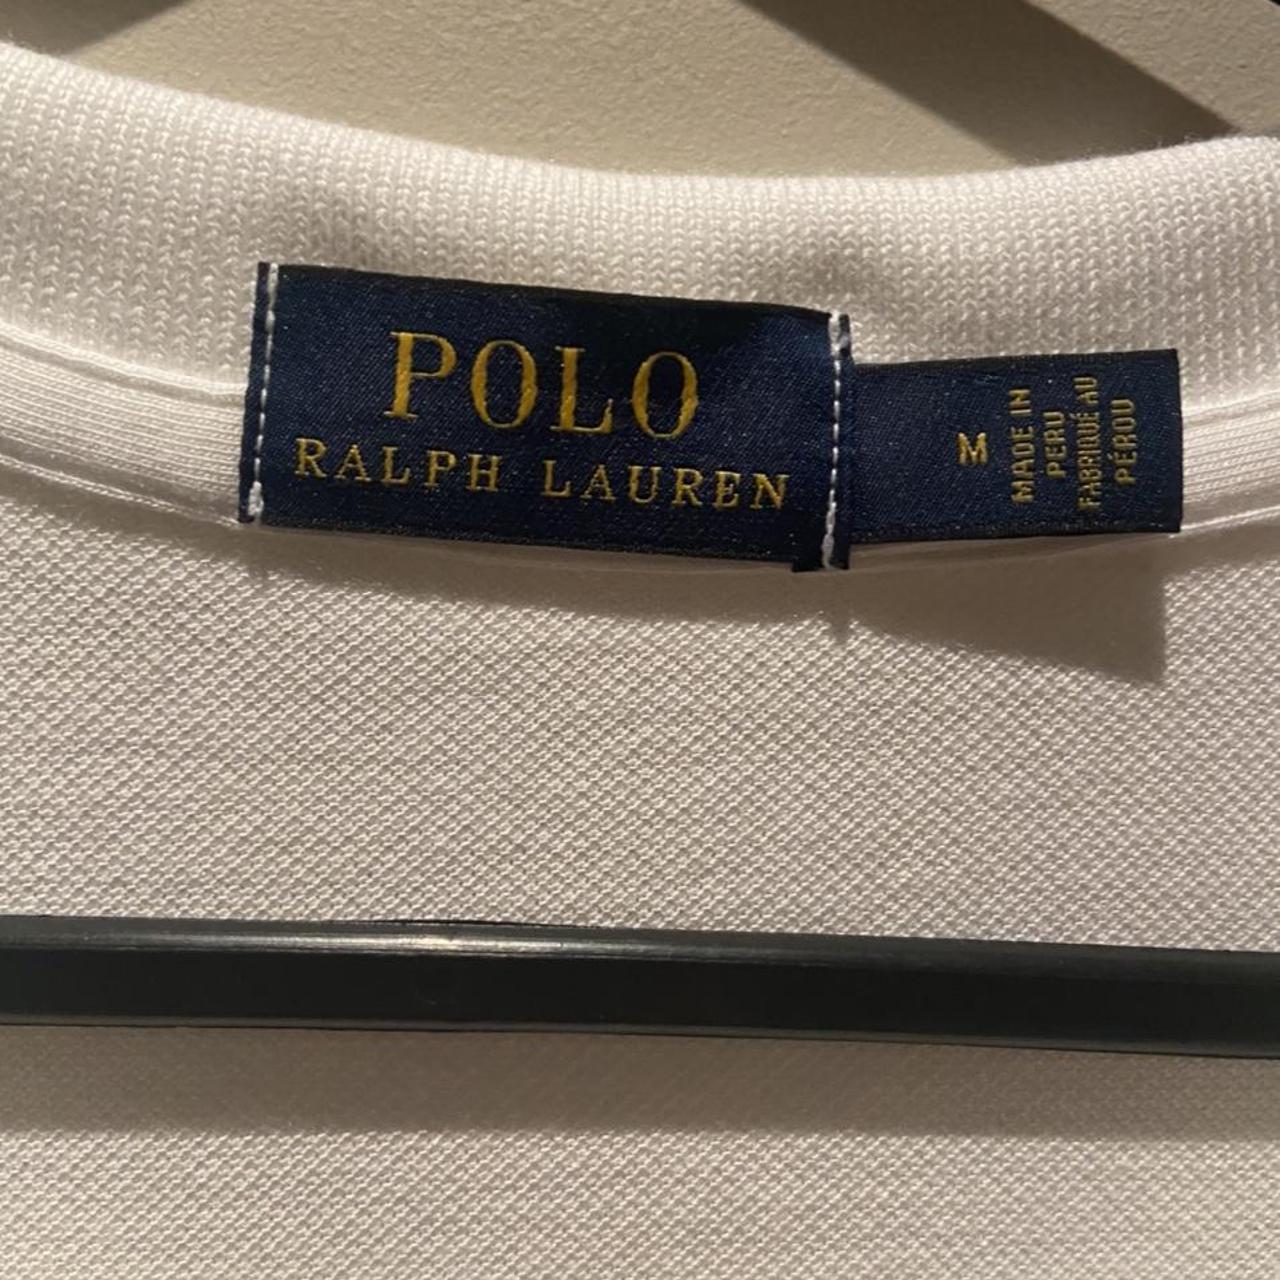 Brand new without tags - Ralph Lauren woman’s polo... - Depop